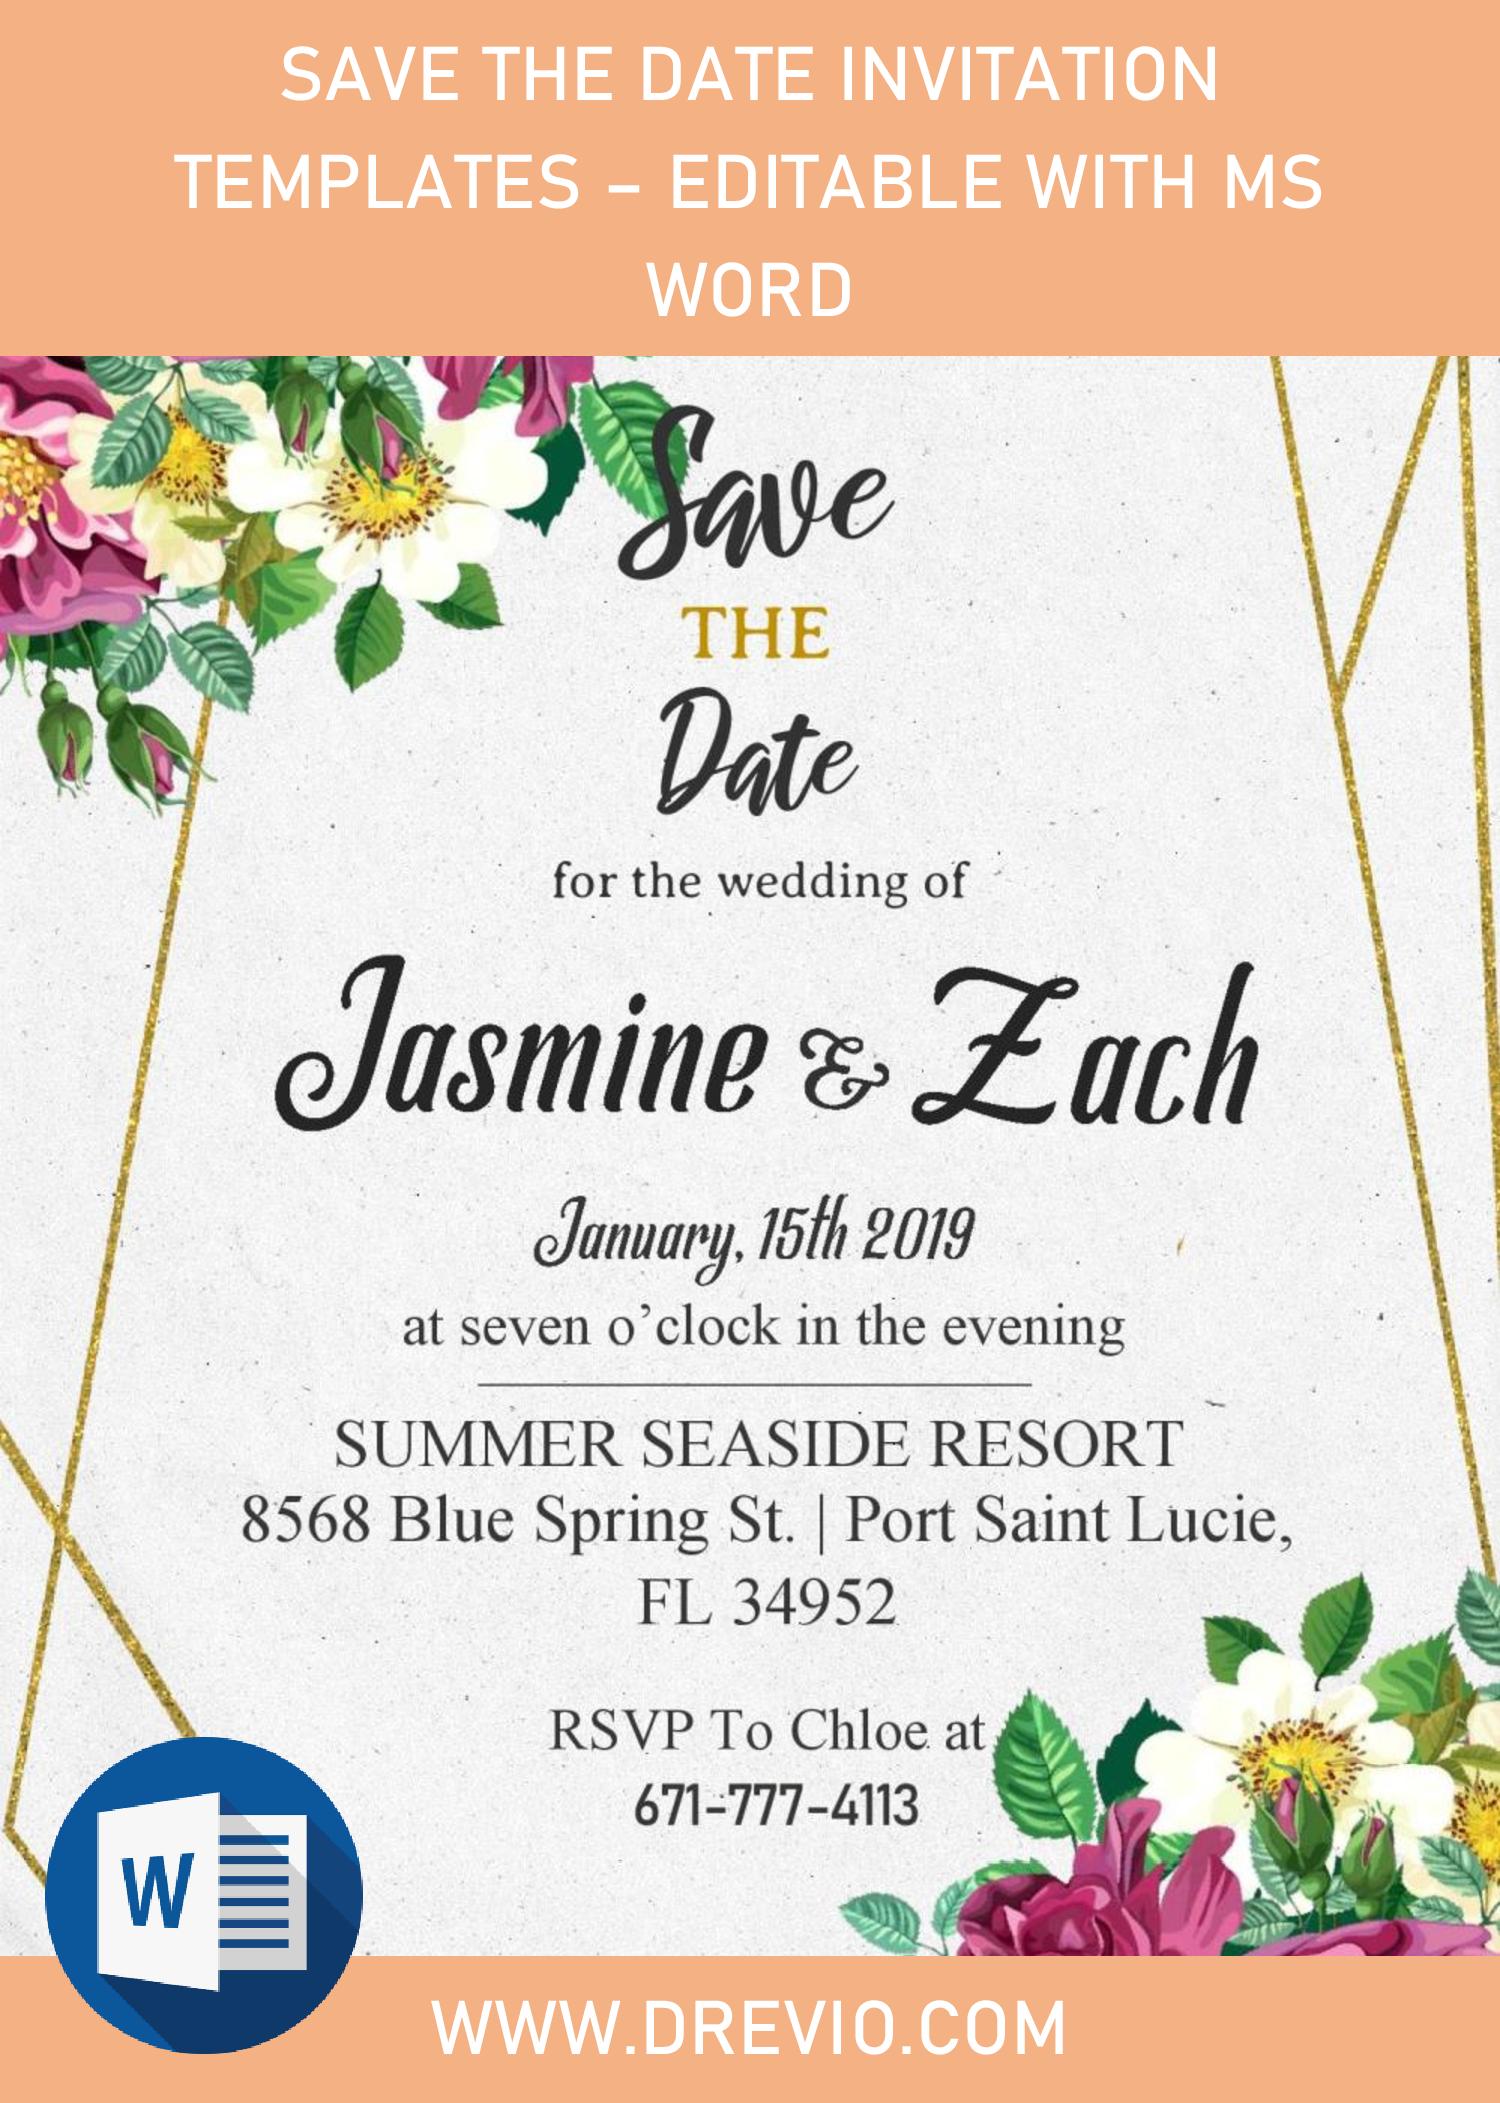 save the date invitation templates – editable with ms word